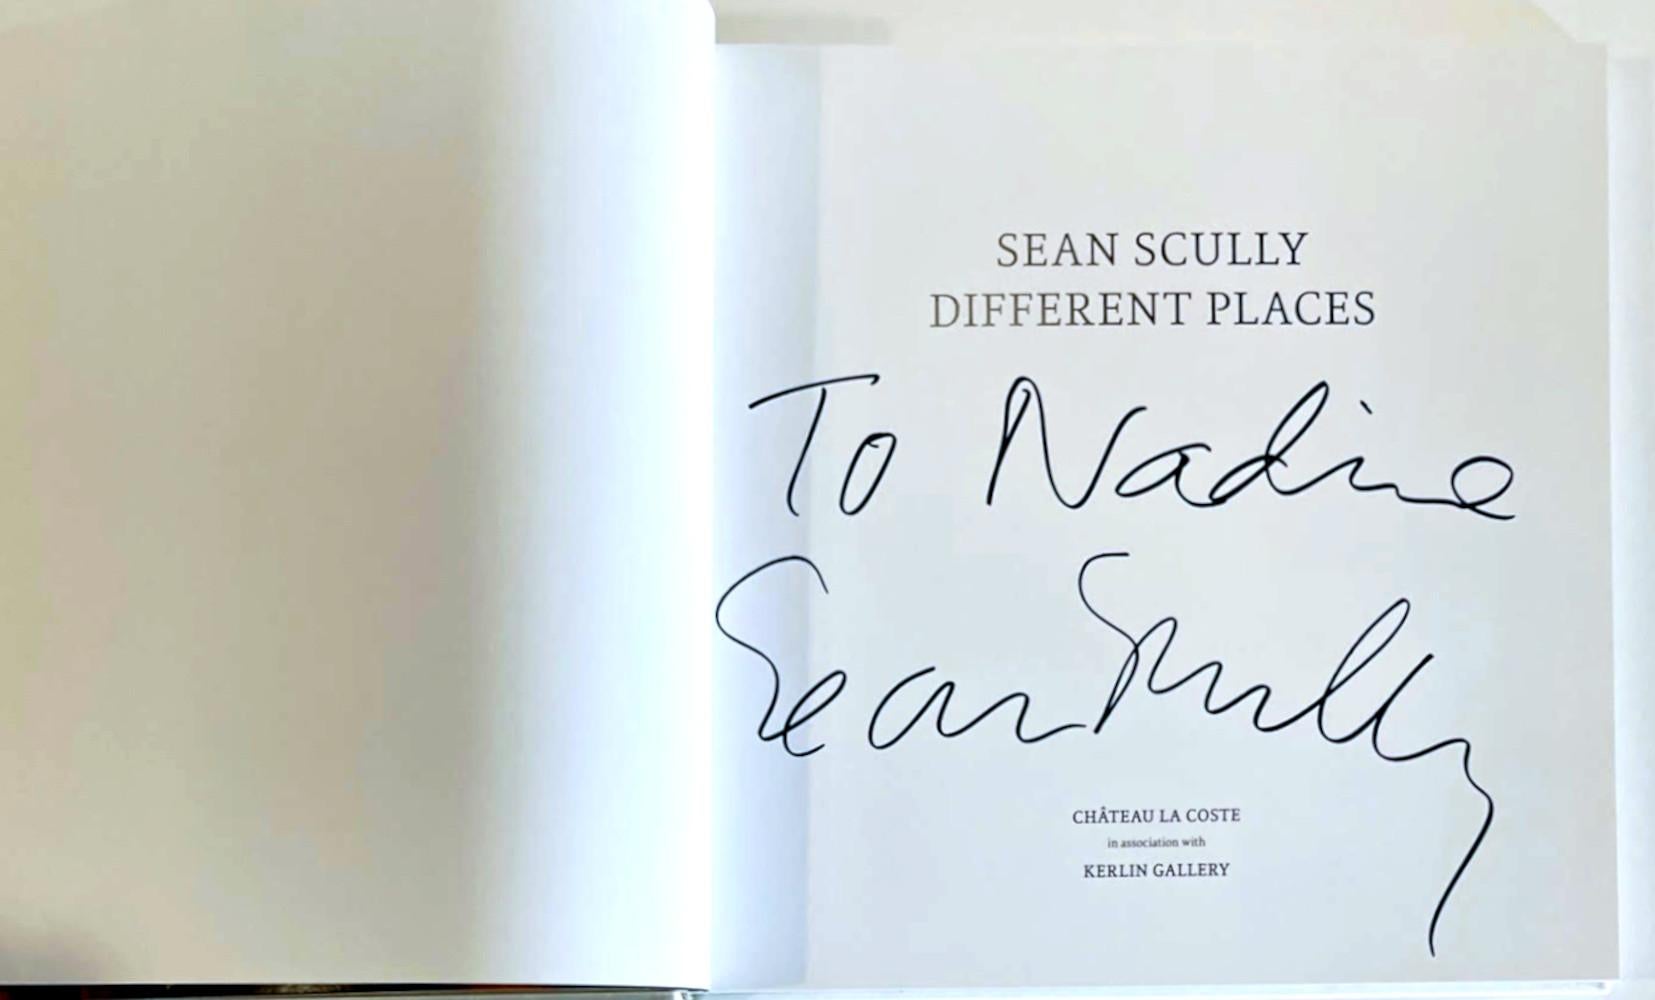 Different Places, Hardback monograph (Hand signed and inscribed by Sean Scully) For Sale 2